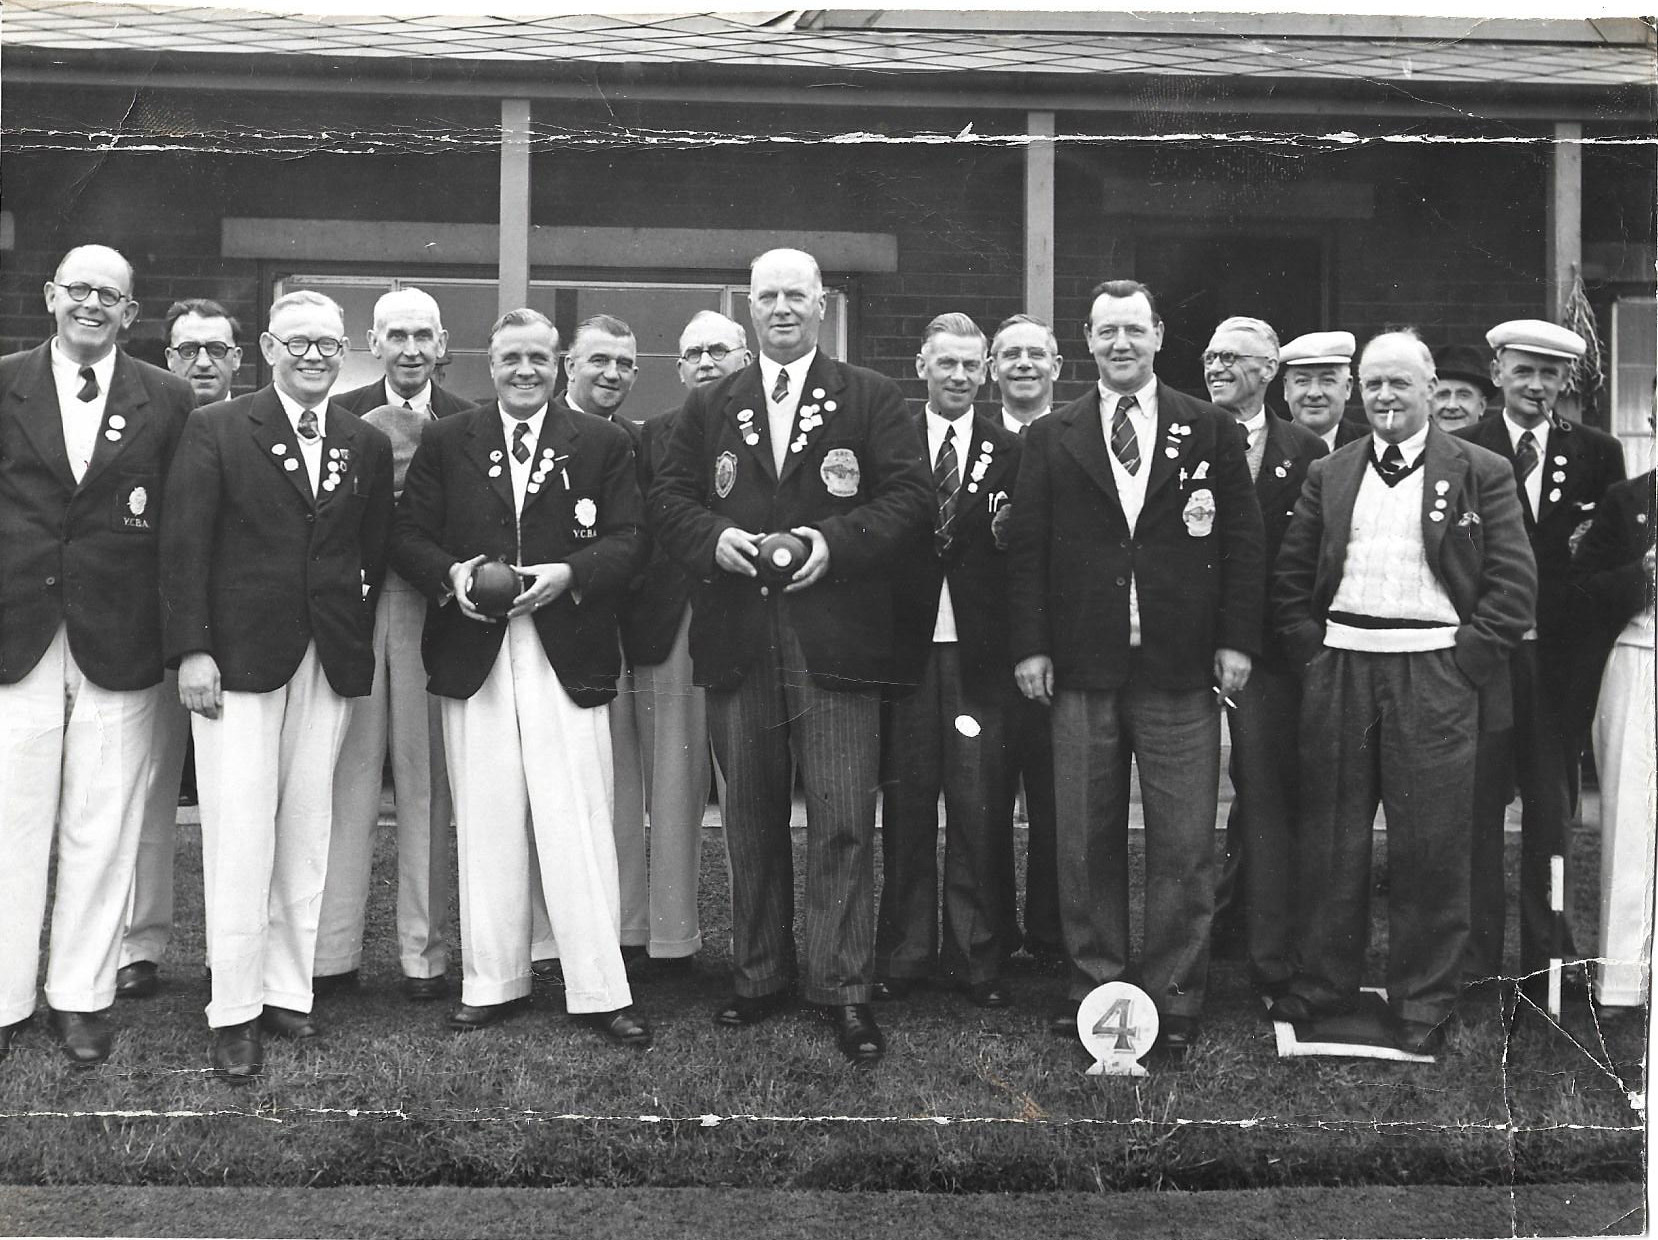 Nunthorpe Bowling Club Old Photographs (date unknown)